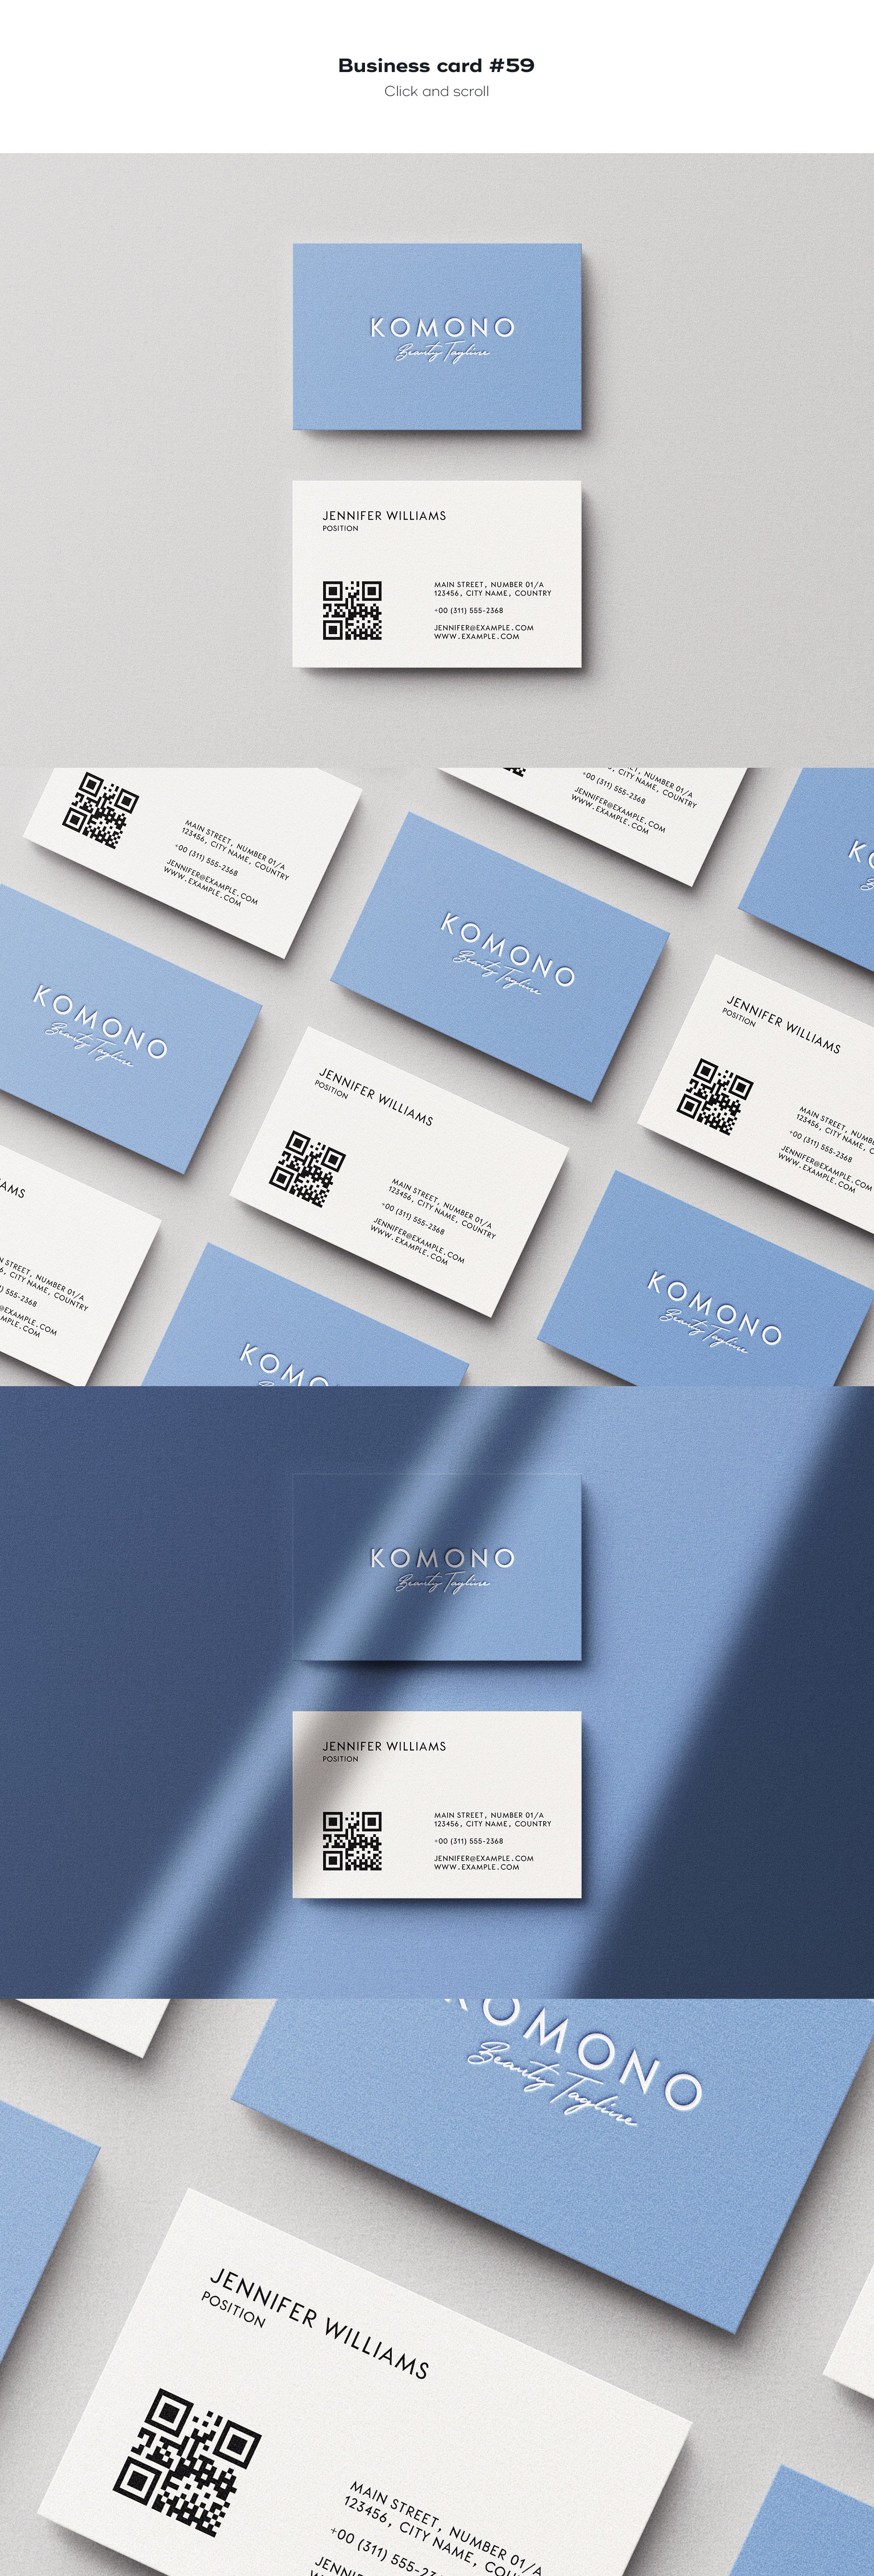 business card 59 827